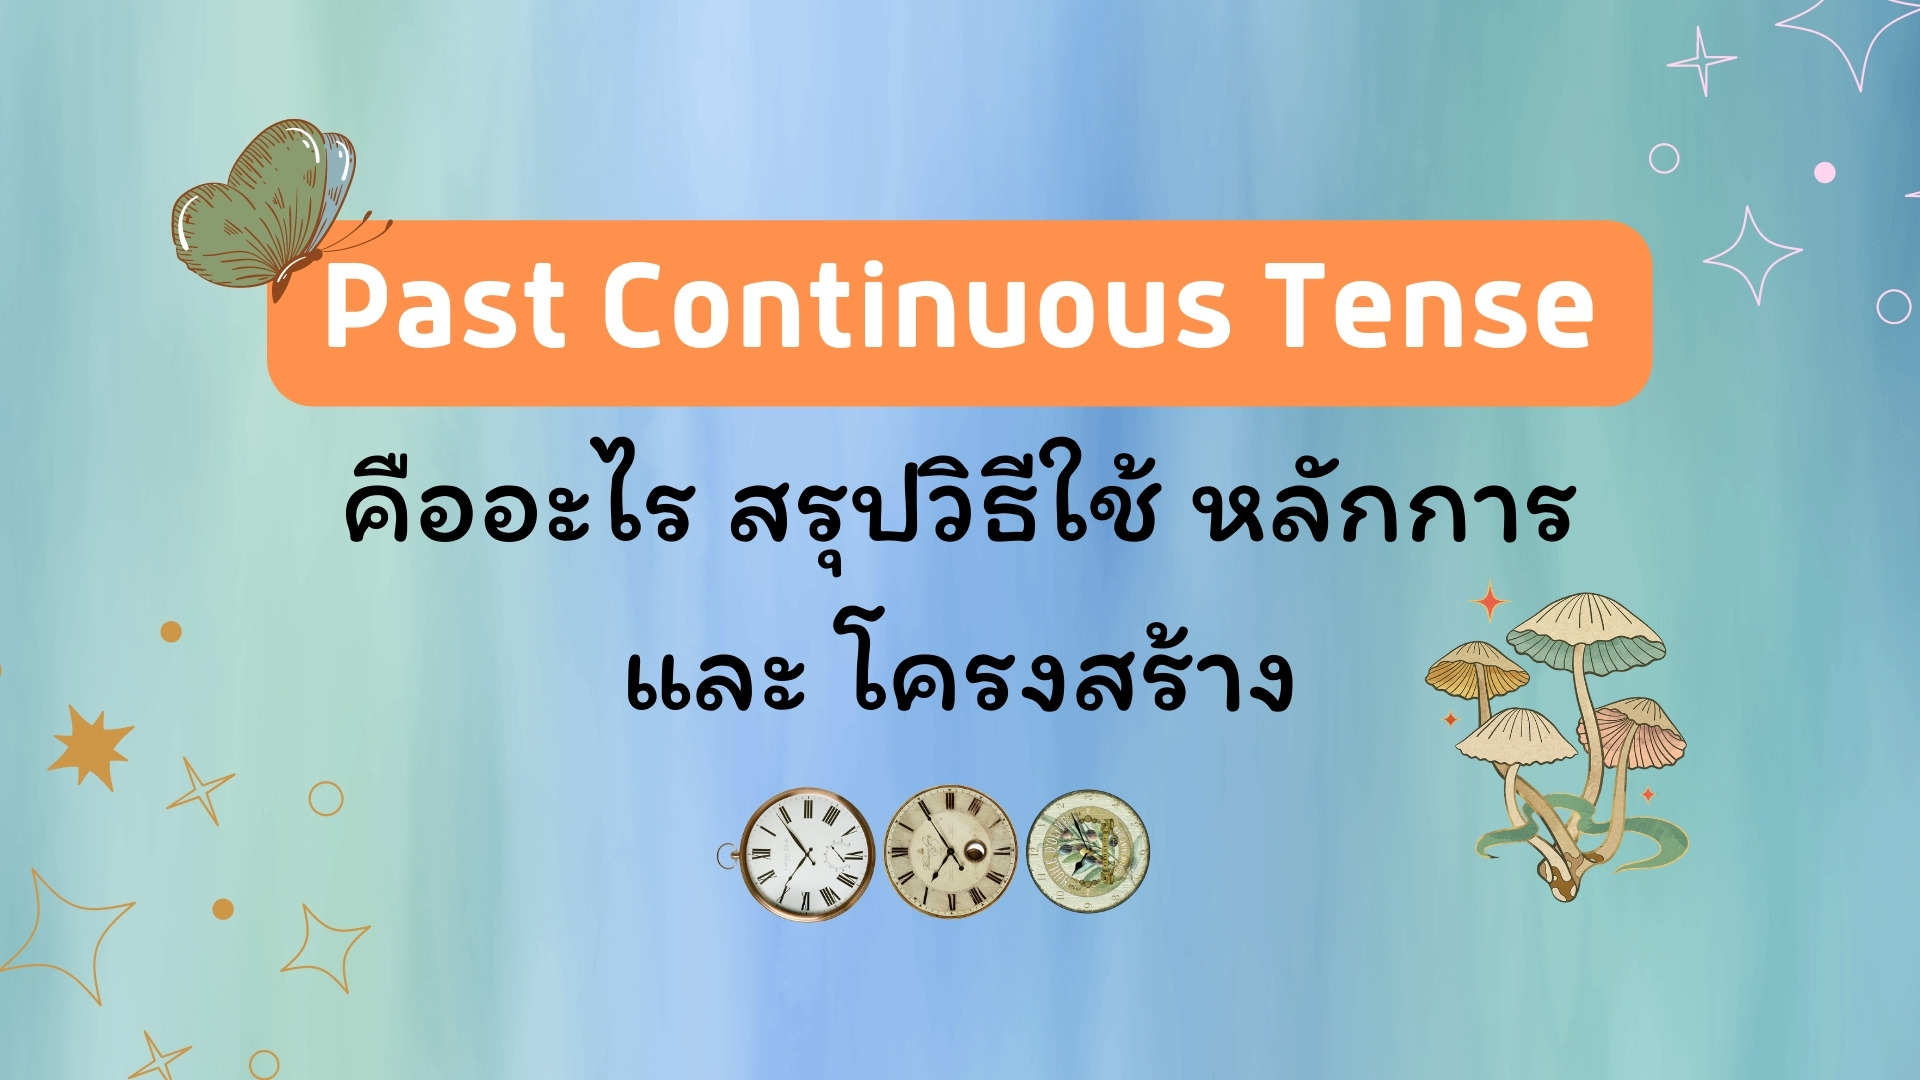 the-present-continuous-tense-worksheet-for-students-to-use-in-their